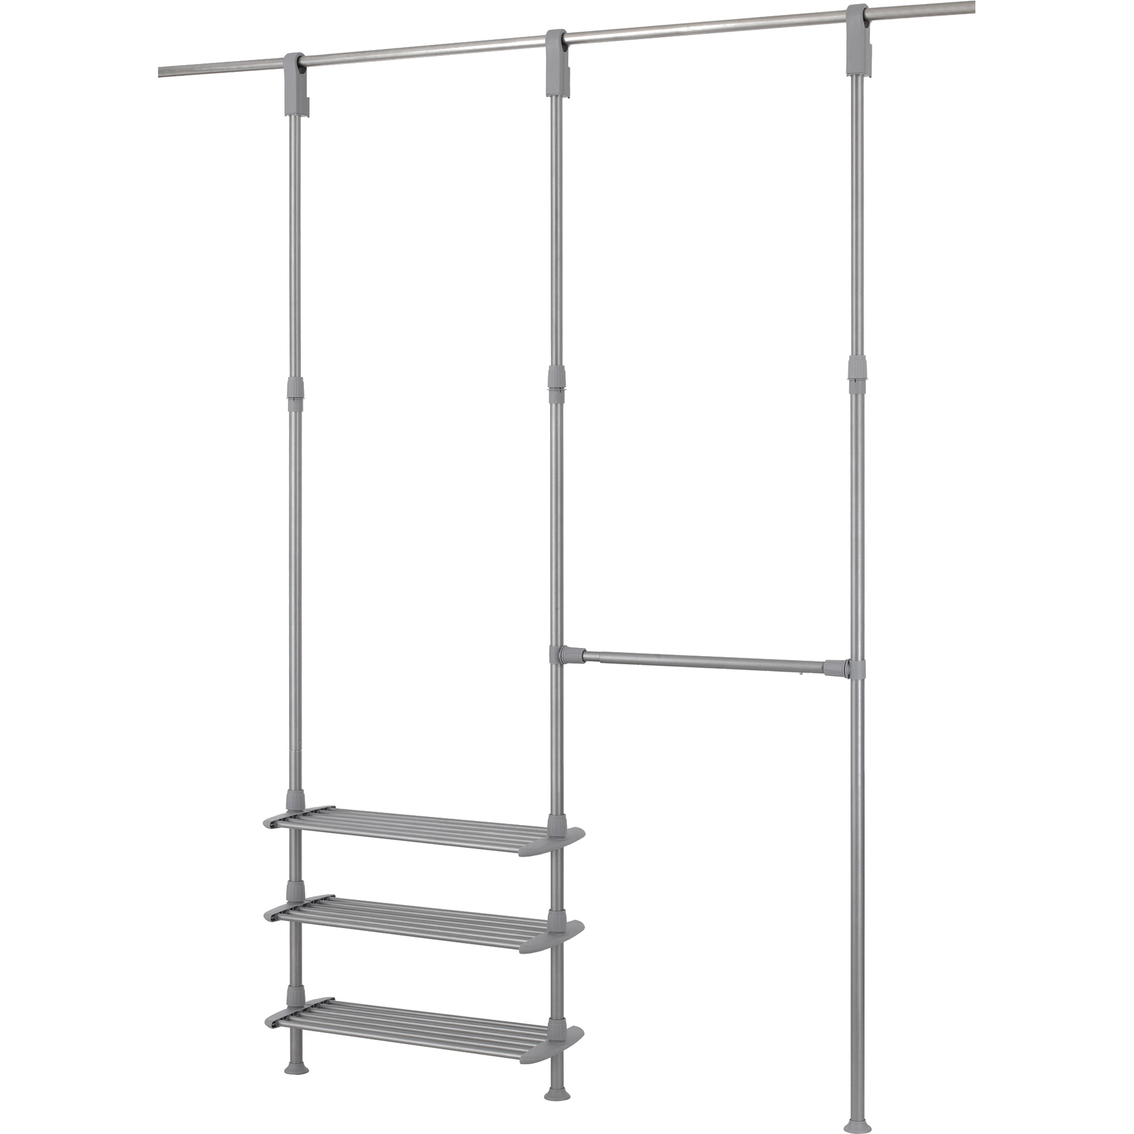 Simply Perfect 2 Rod Adjustable Closet System - Image 2 of 3